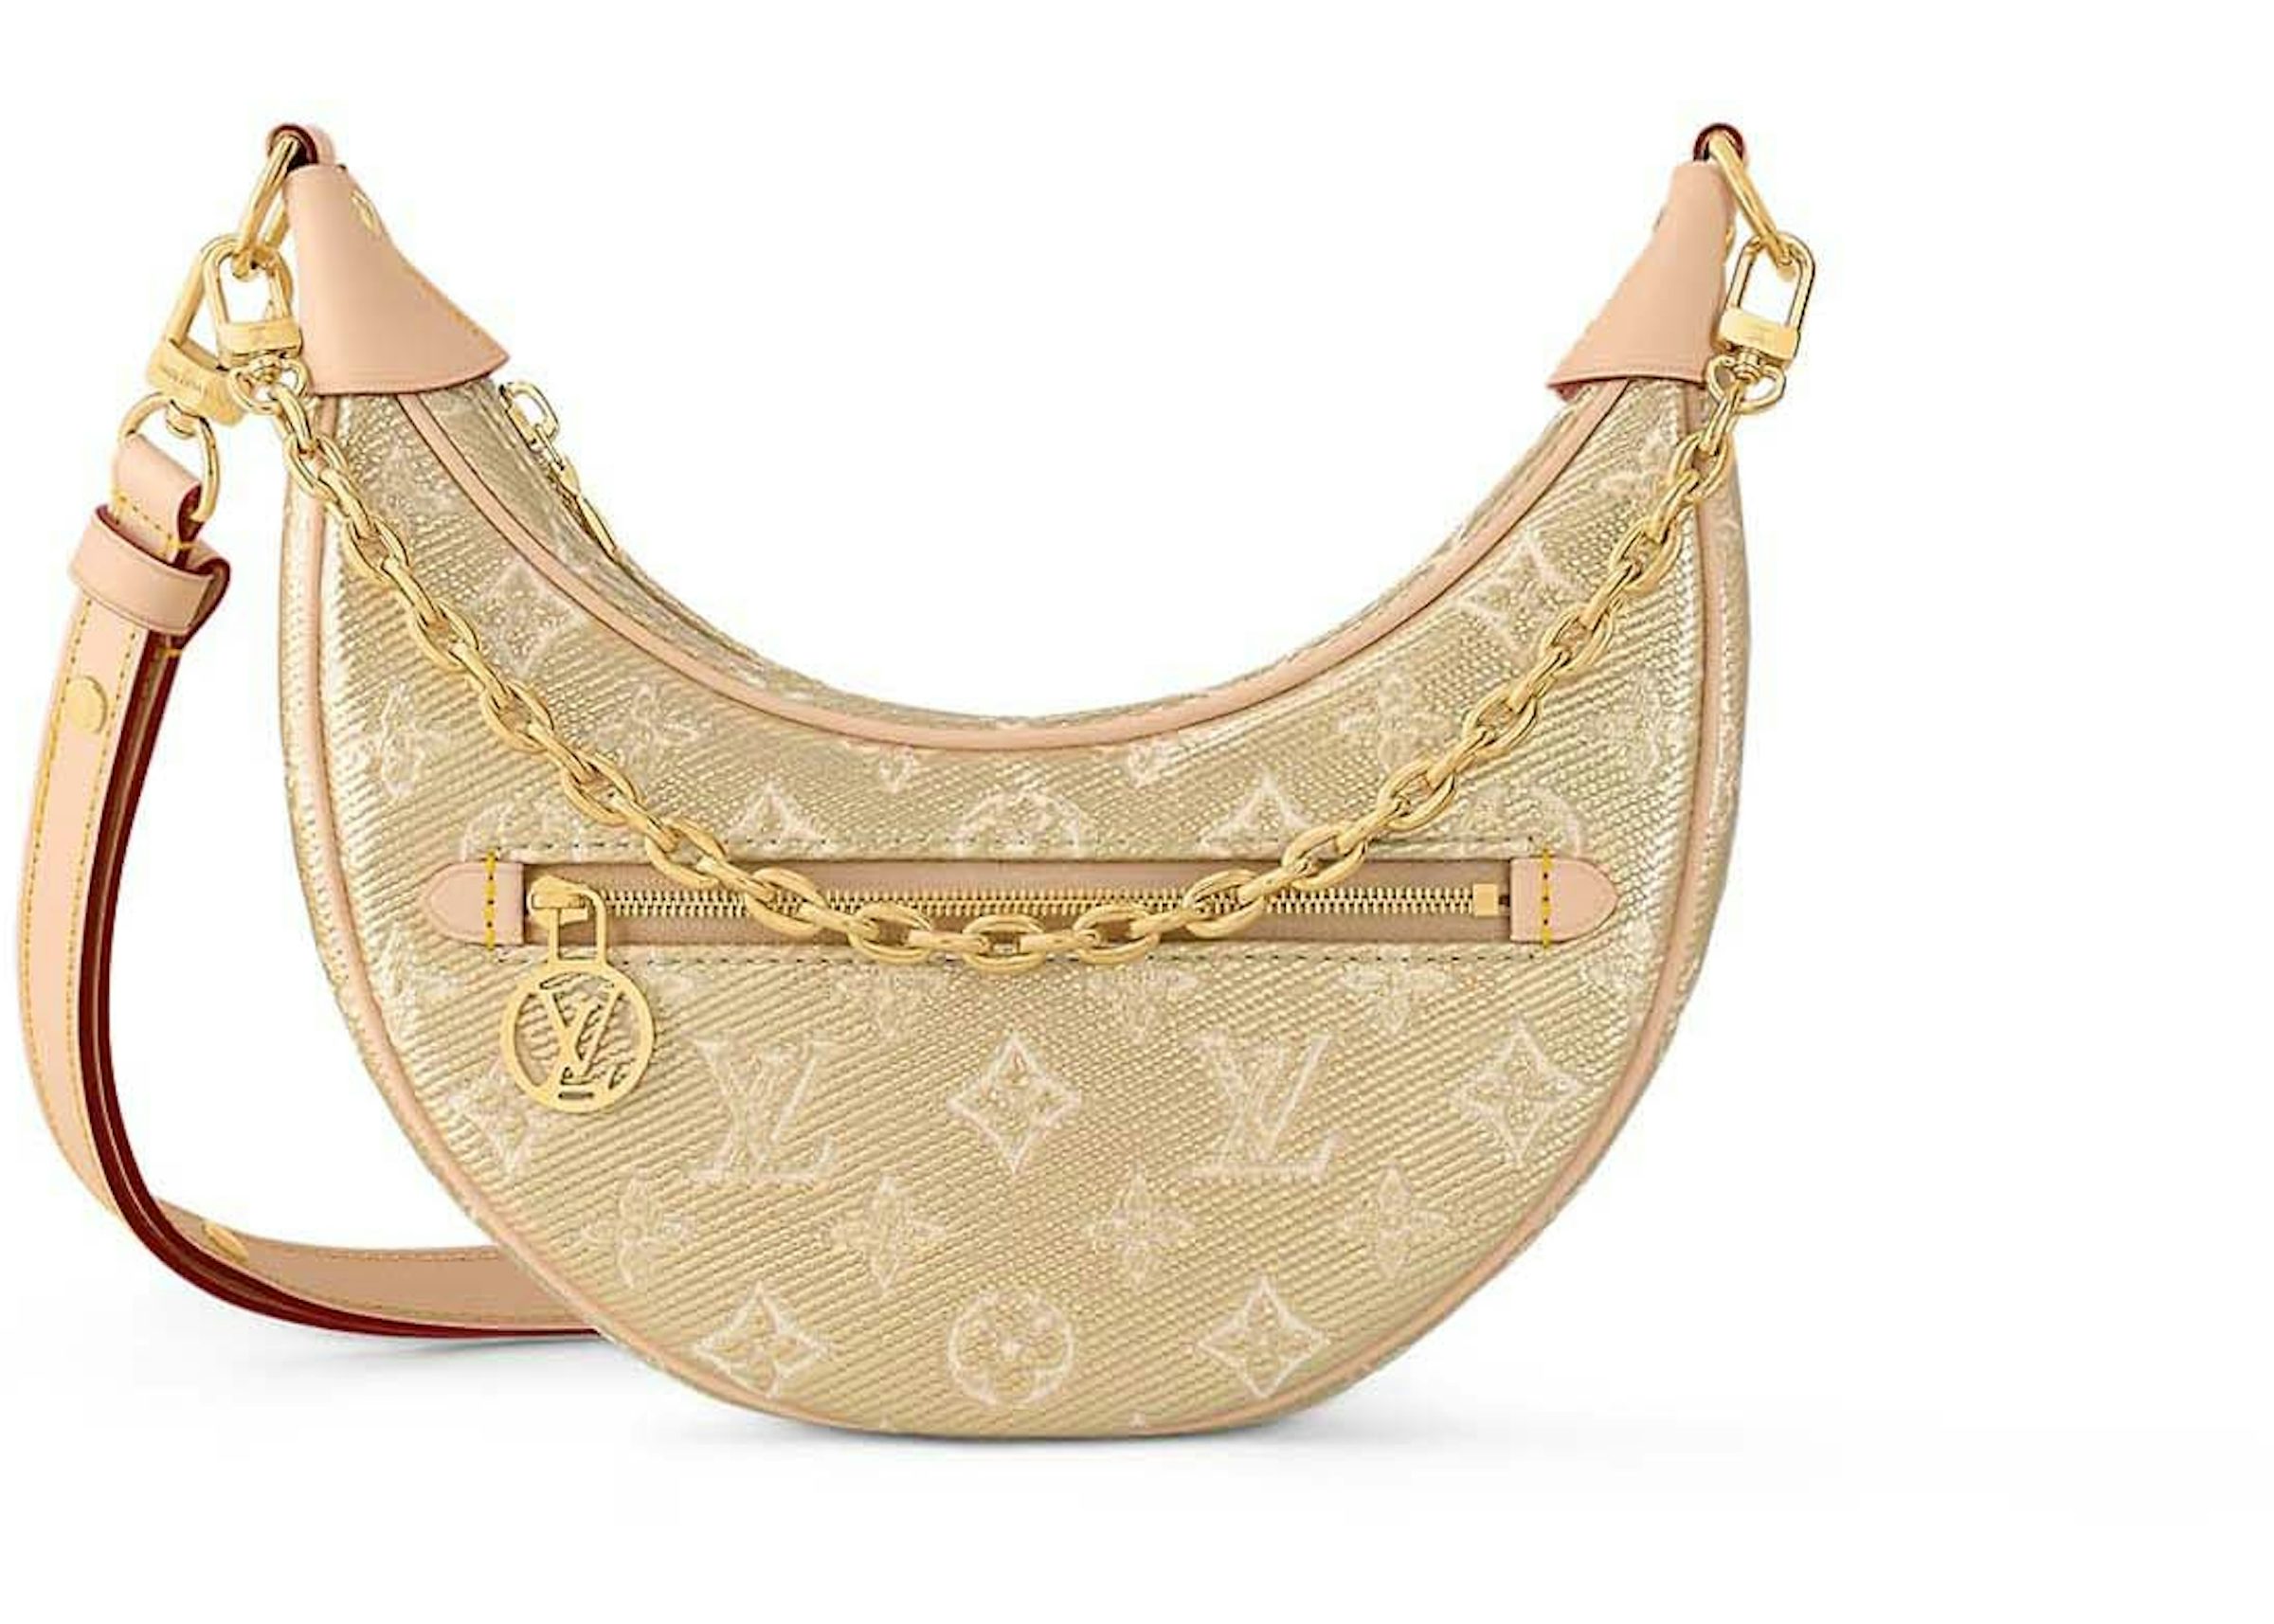 Louis Vuitton Loop PM Beige in Monoglam Coated Canvas with Gold